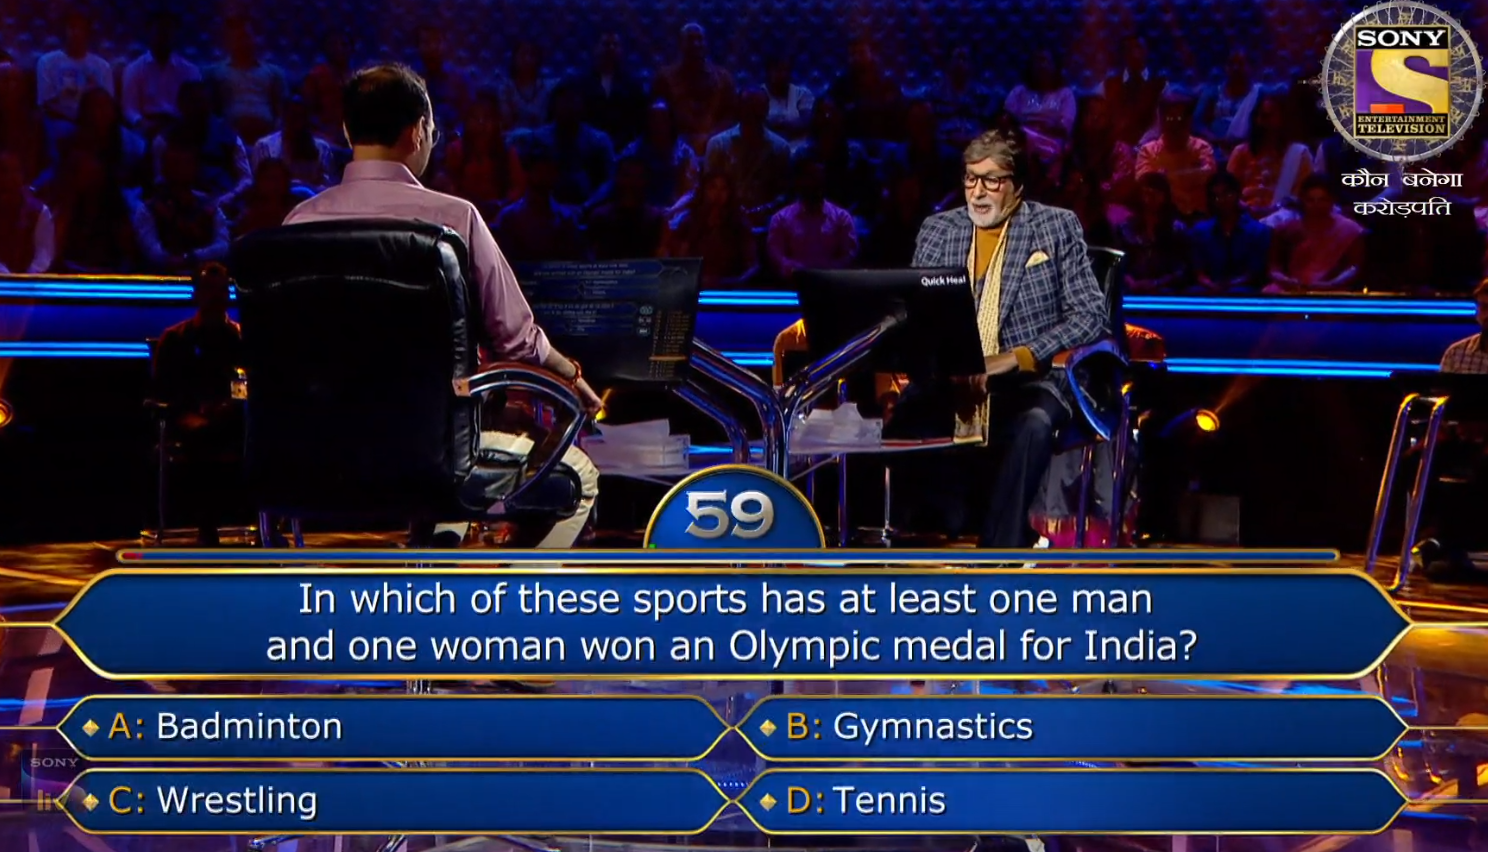 Ques : In which of these sports has at least one man and one women won an Olympic medal for India?